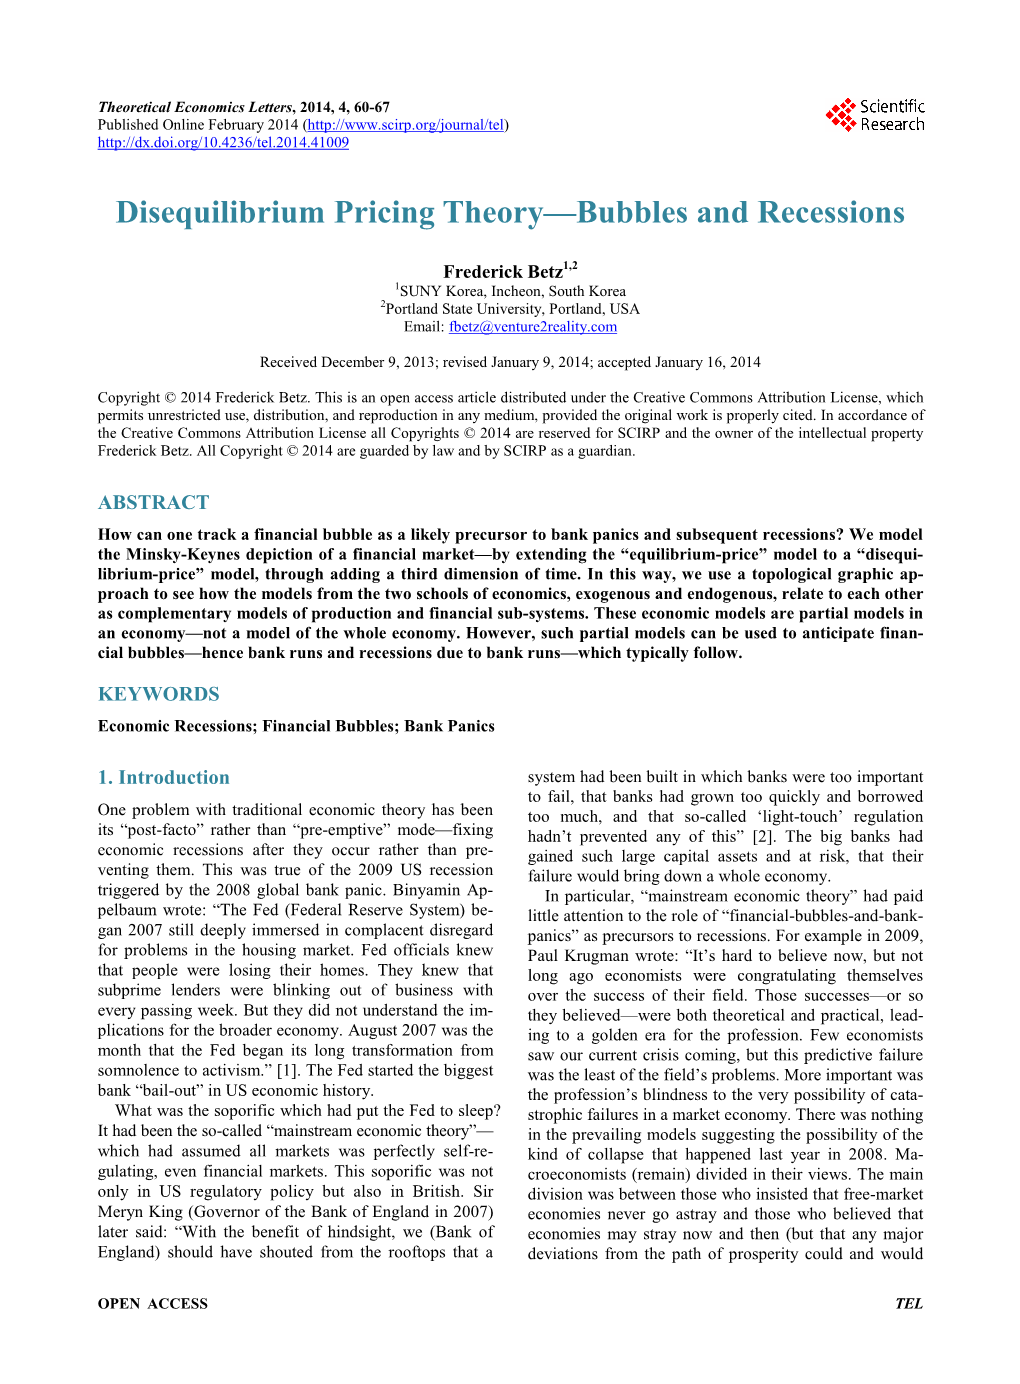 Disequilibrium Pricing Theory—Bubbles and Recessions